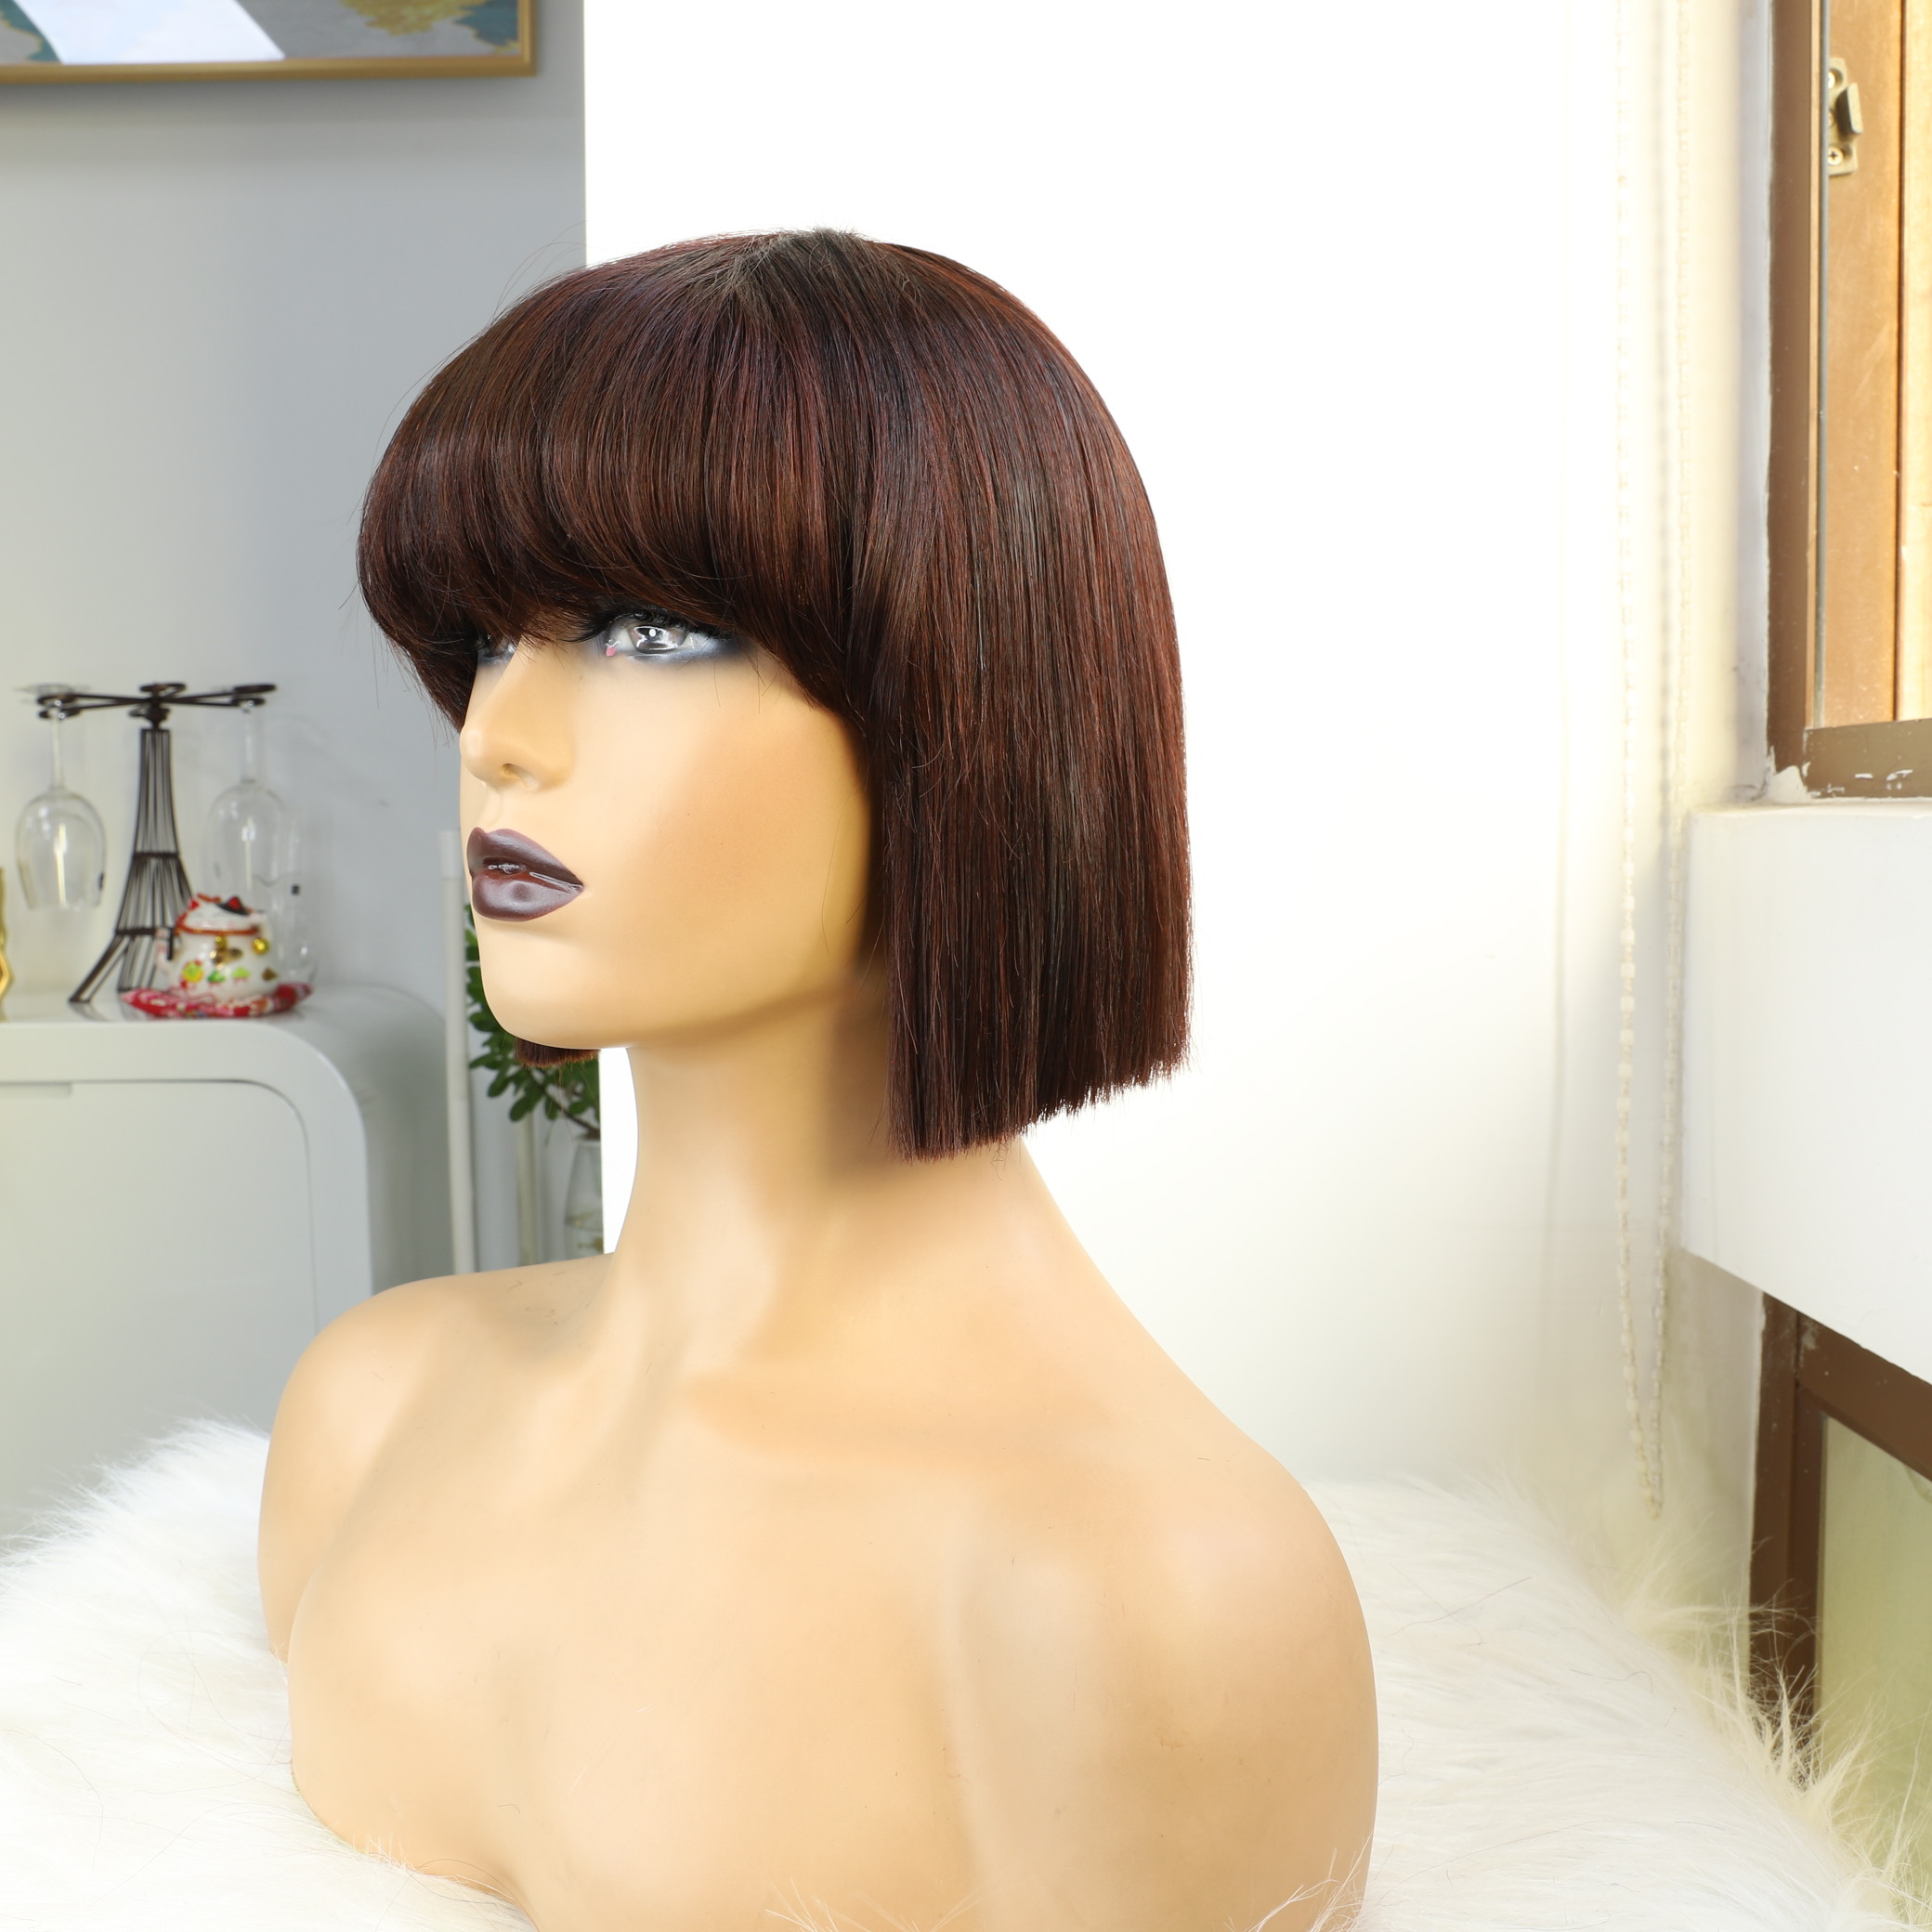 Short Bob Human Hair Wig With Bangs for Women Straight Remy Hair Wigs Dark Brown